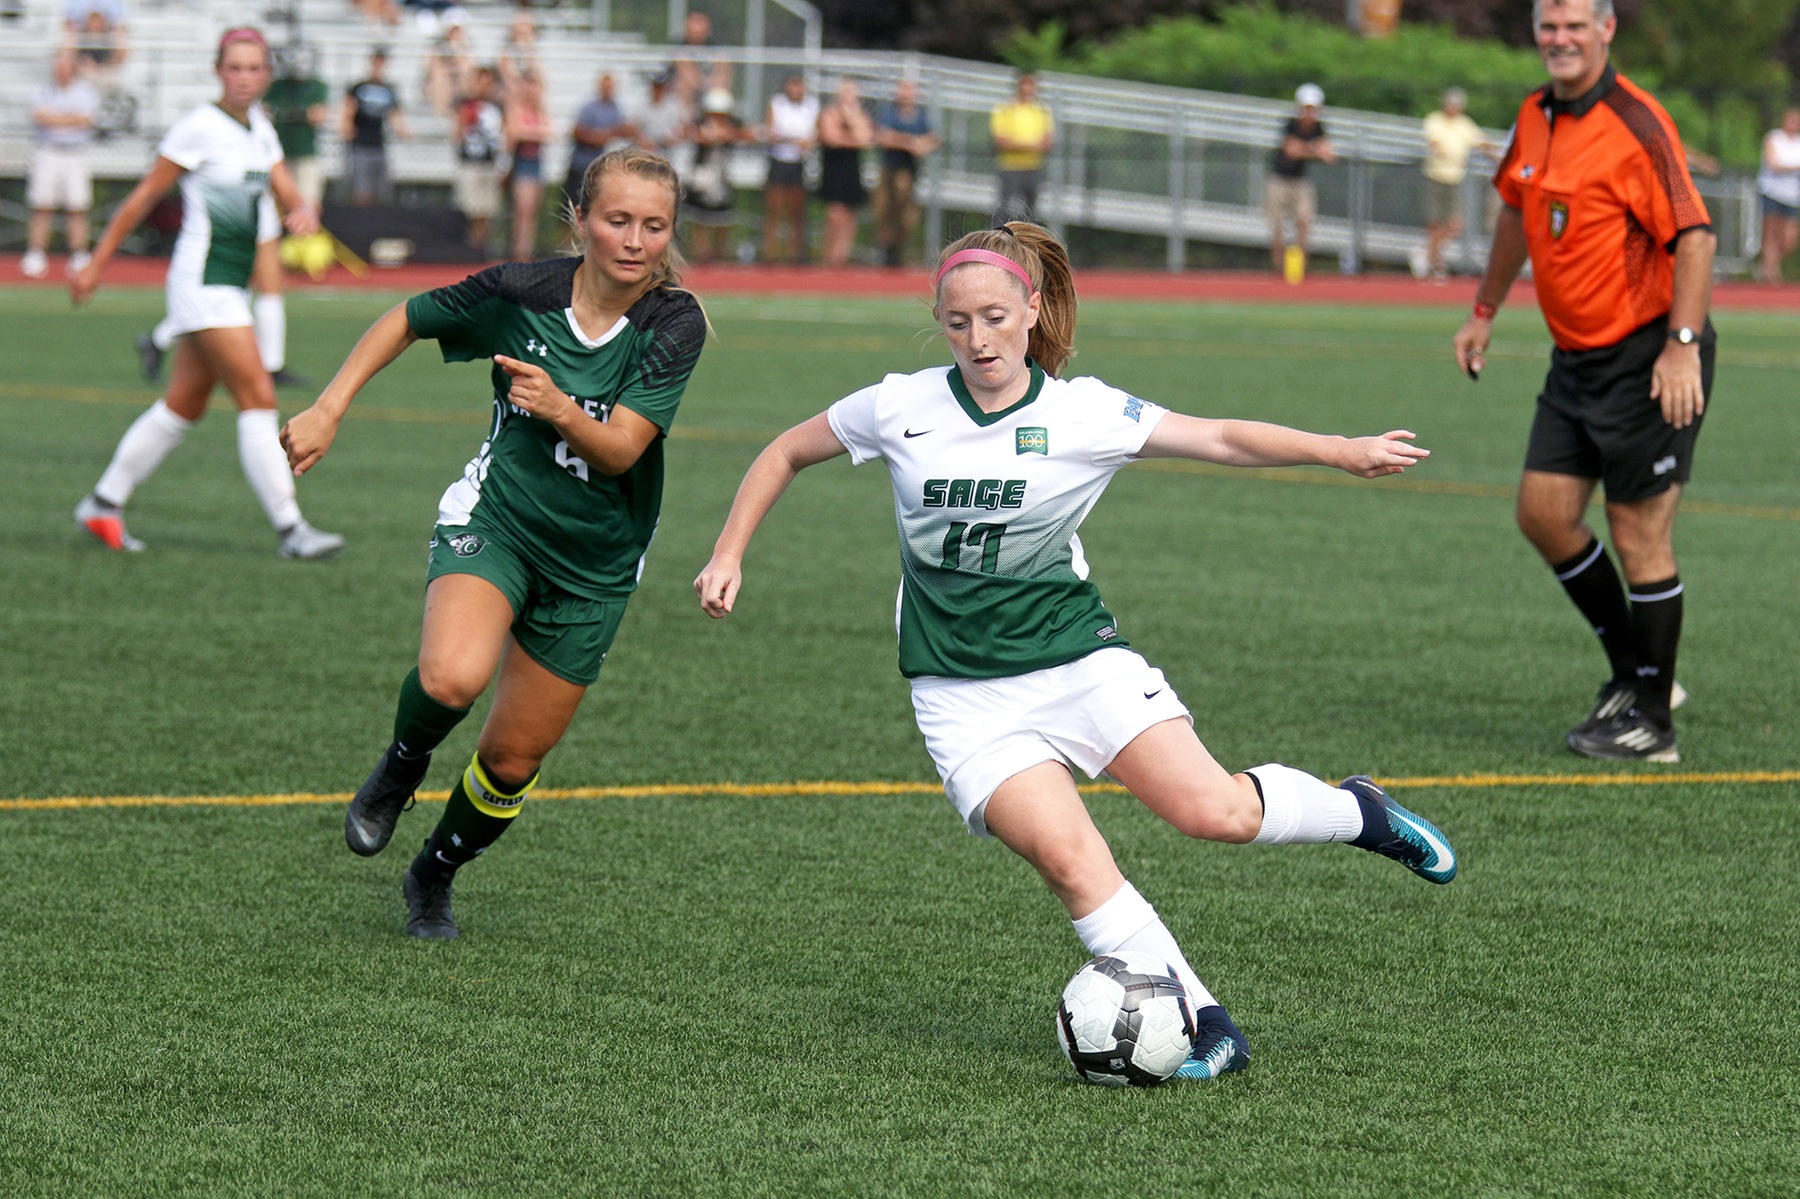 Sage women's soccer now 3-0 after 3-1 win at Bard